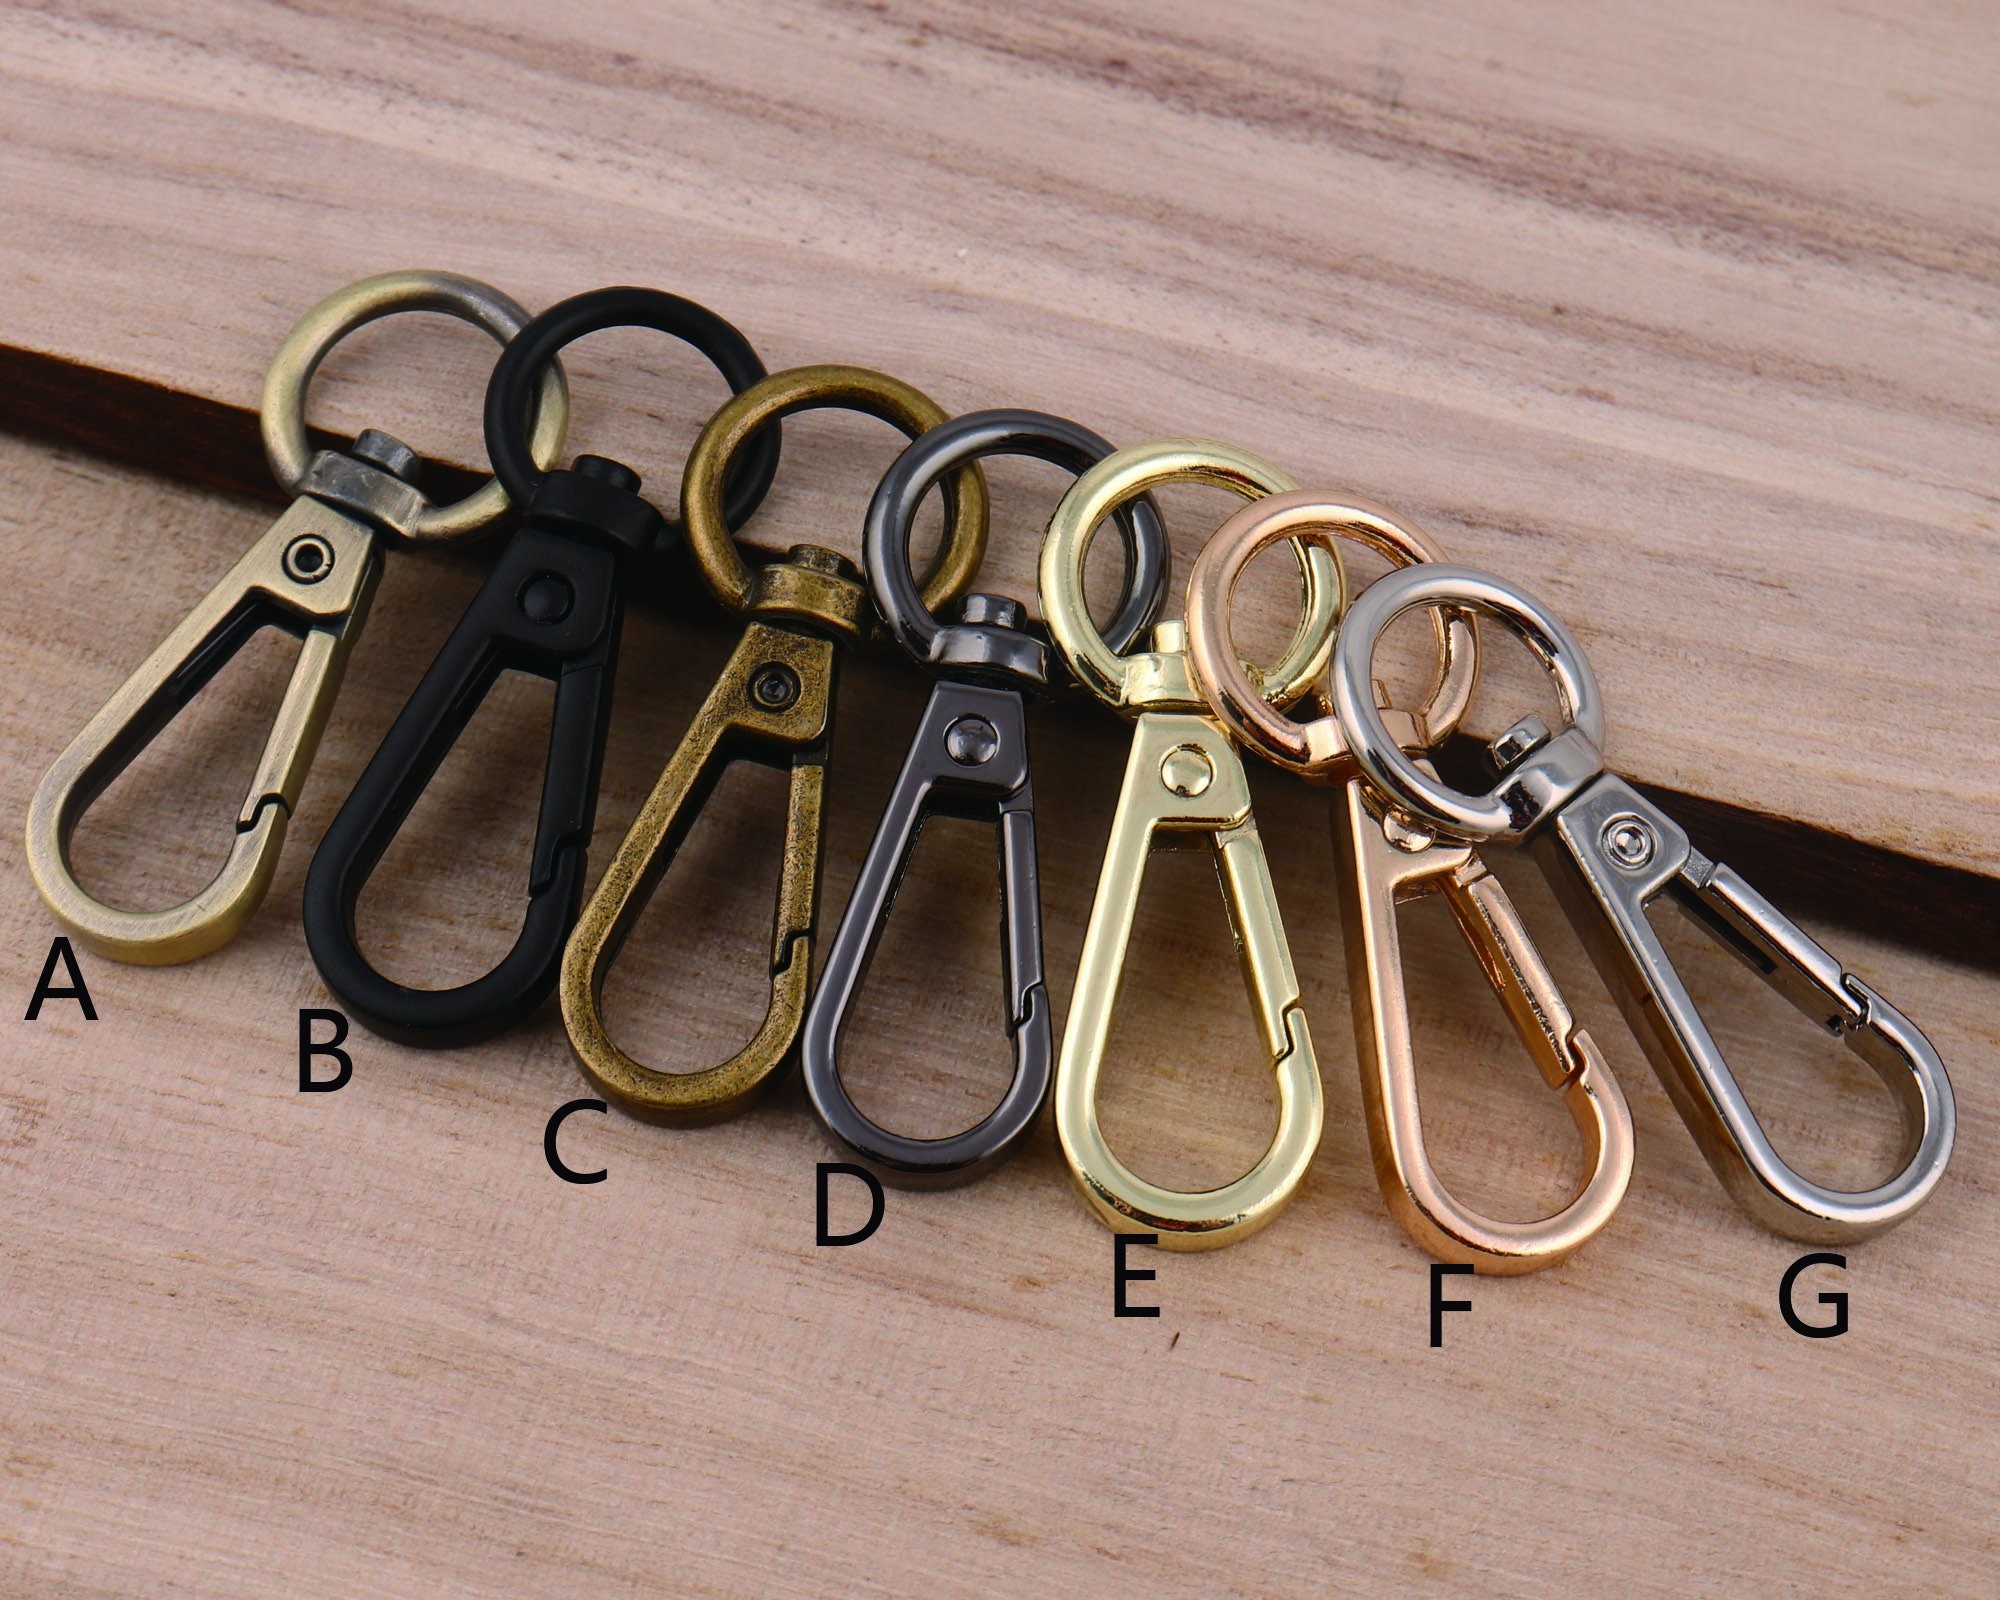 5 Keychain With Lobster Clasp,key Ring With Swivel Clasp,keychain Hook,split  Ring,key Holder,swivel Clip,key Ring Clasp,charms Keychain 